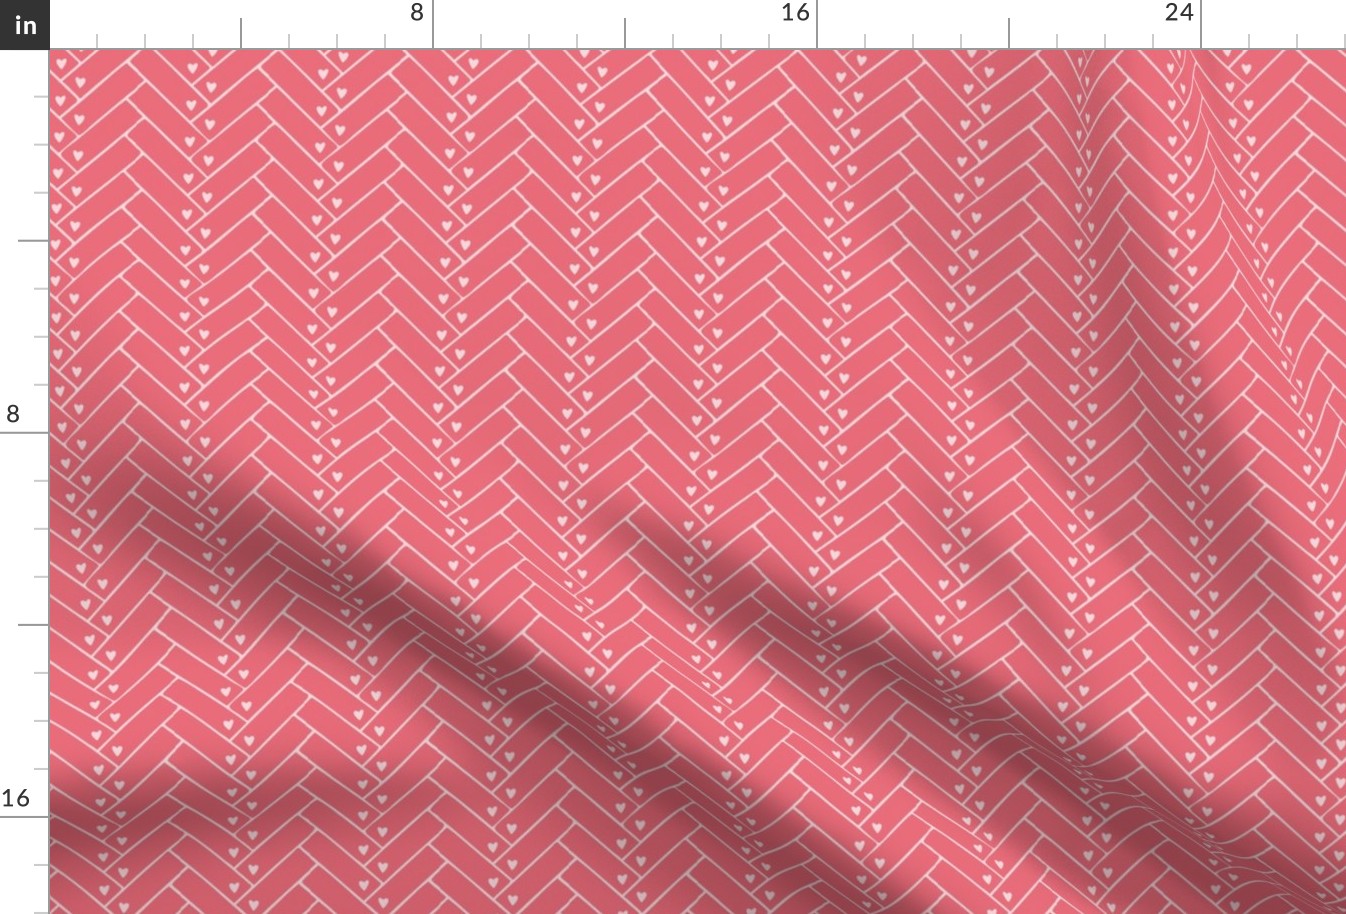 Affectionate Angles_Spoonflower